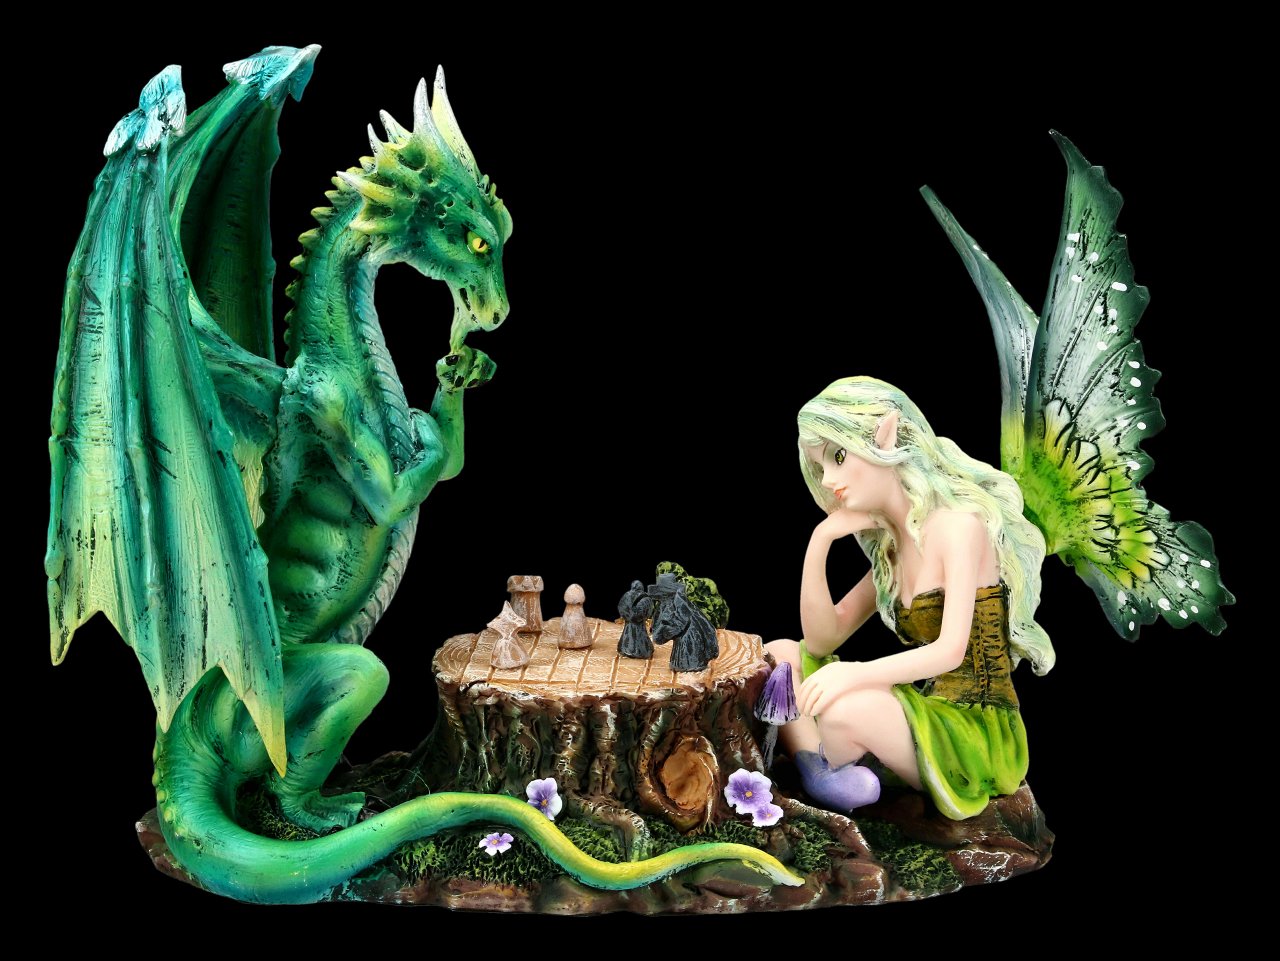 Fairy Figurine playing Chess with green Dragon